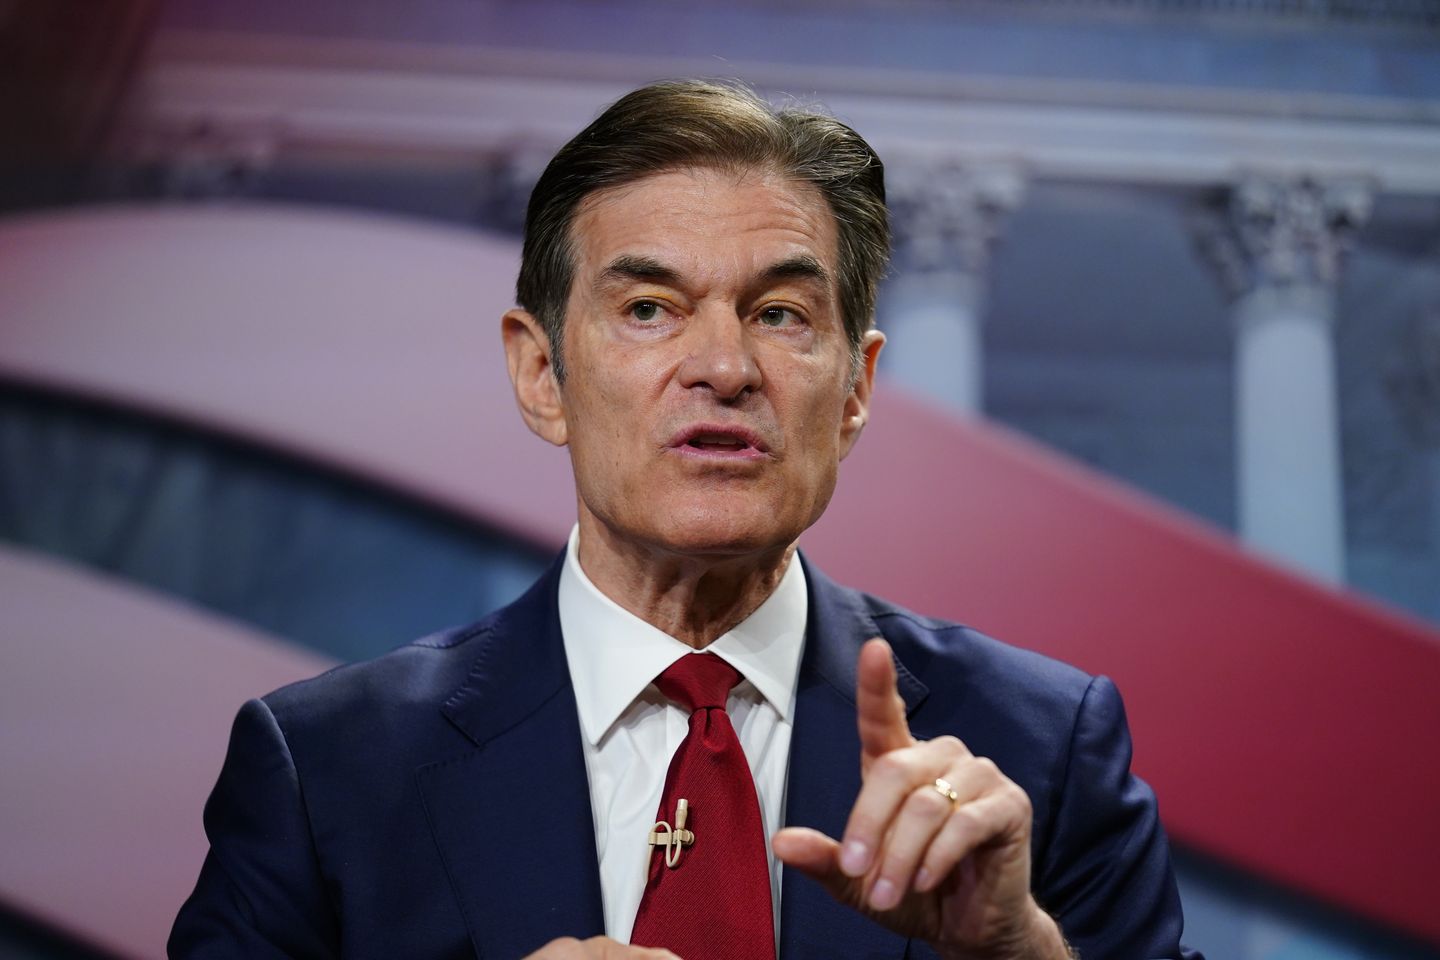 Columbia University removes from website mentions of GOP Senate candidate Mehmet Oz